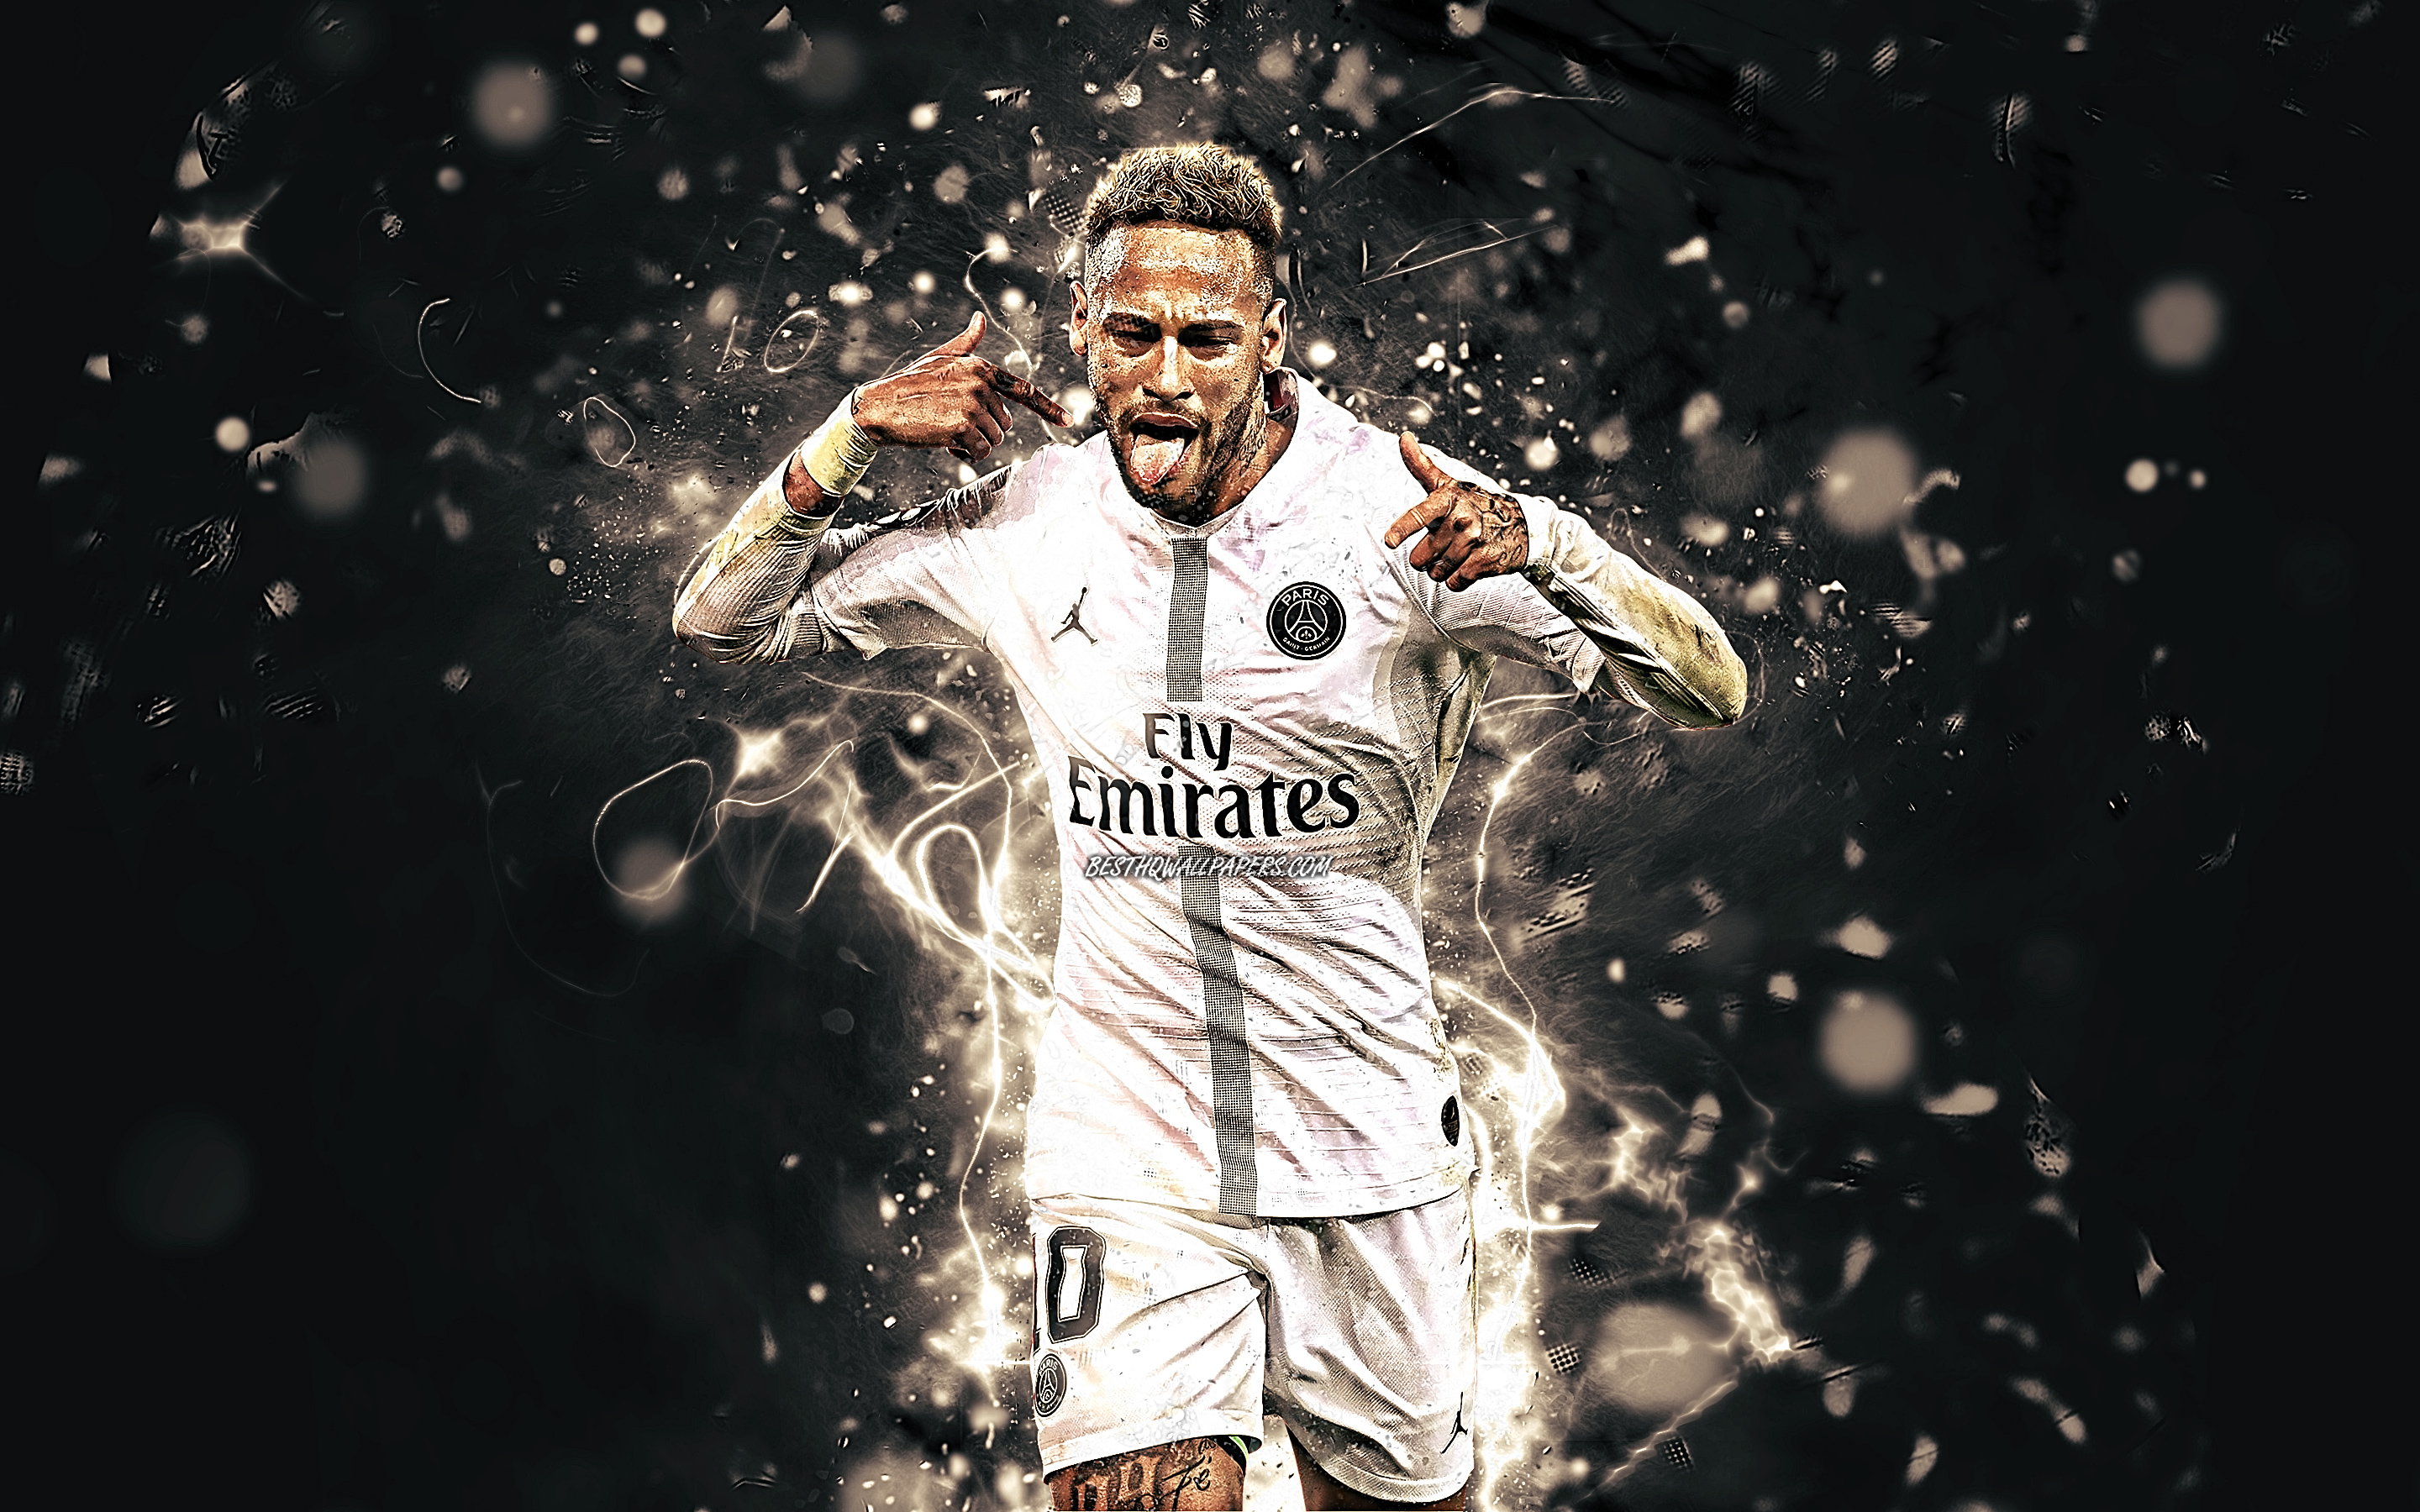  Neymar Wallpapers 4K  Full HD Backgrounds  Apk Download for Android  Latest version 214 footballuhdhdneymarjrwallpapers